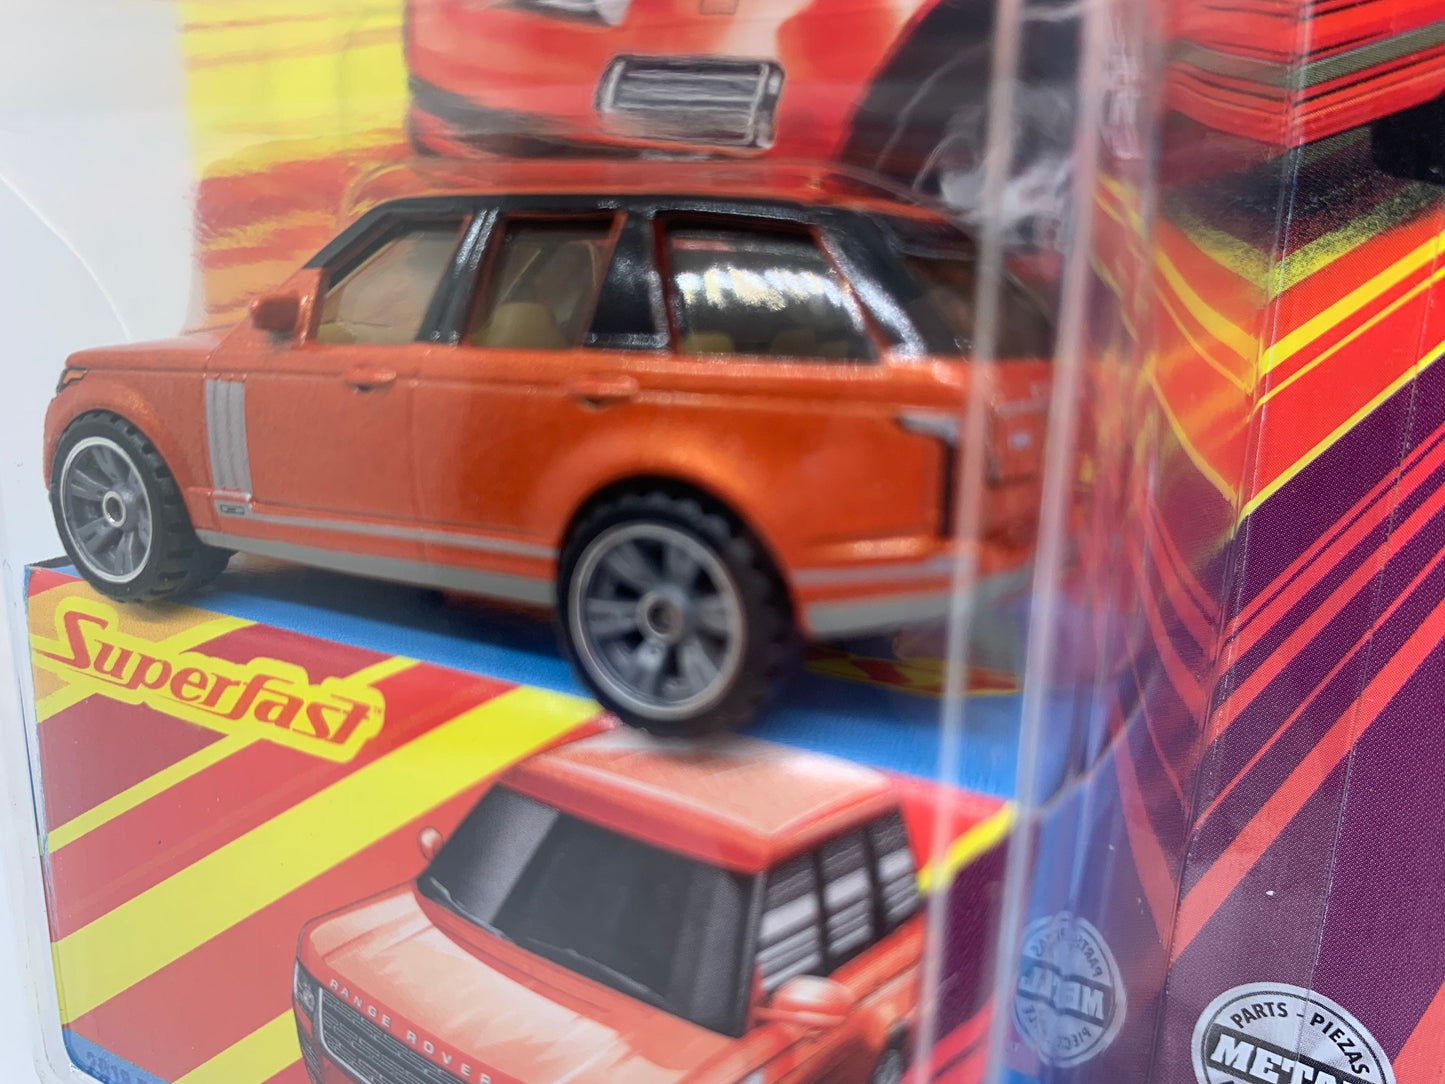 Matchbox Range Rover Vogue SE Orange Superfast Perfect Birthday Gift Miniature Collectable Model Toy Car